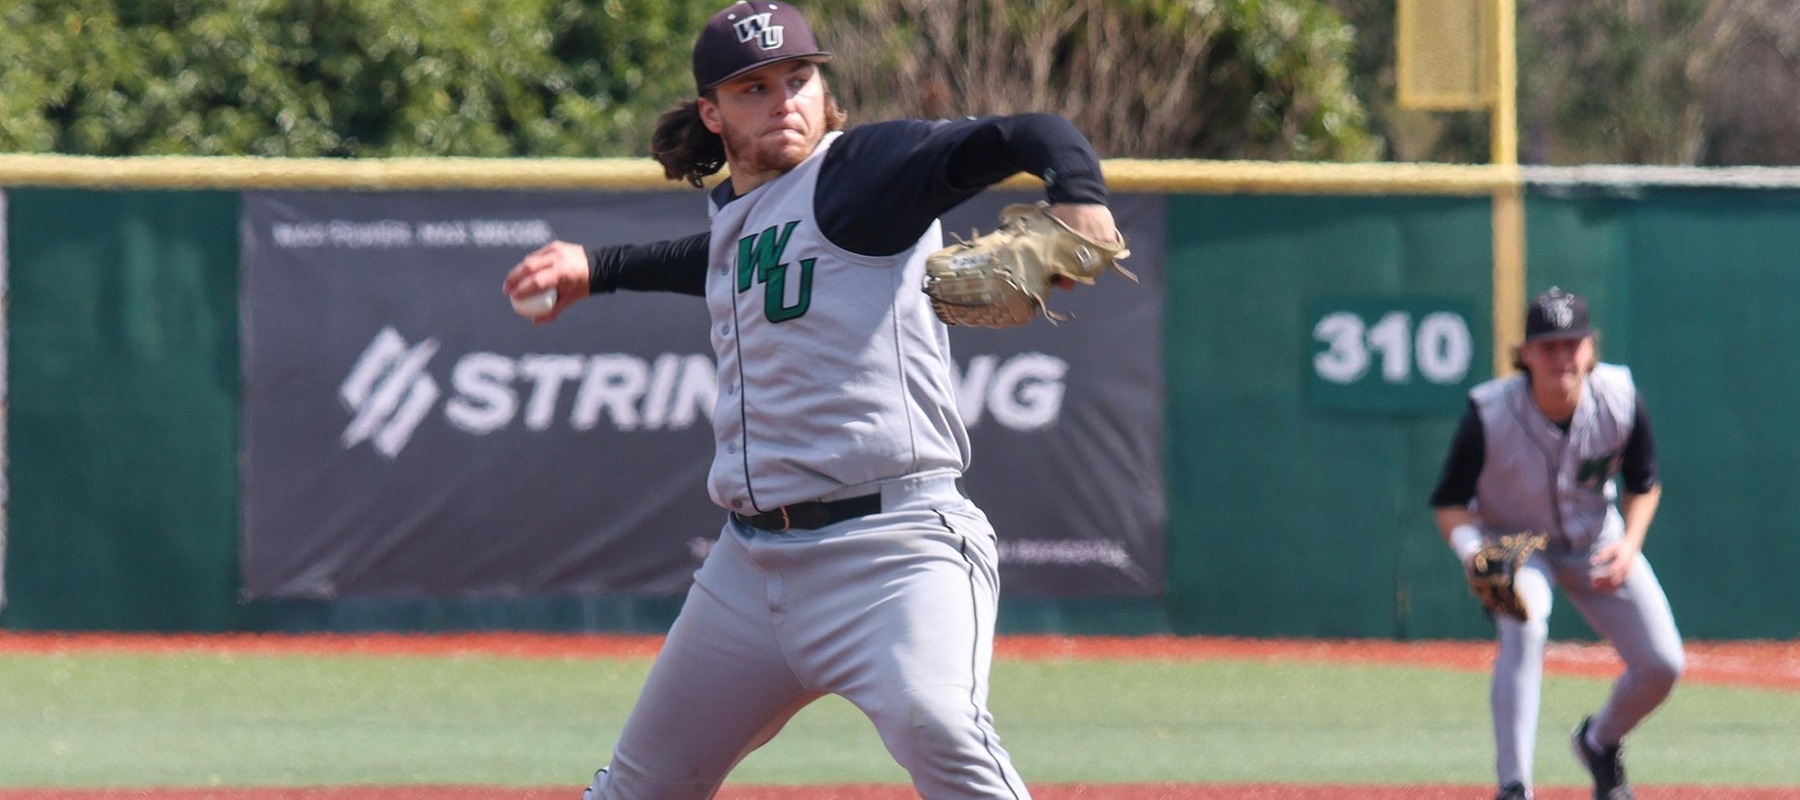 File photo of Scott Borgmann who tossed six innings against New Haven, striking out six. Copyright 2024; Wilmington University. All rights reserved. Photo by Trudy Spence. February 25, 2024 vs. Staten Island in Myrtle Beach, S.C.